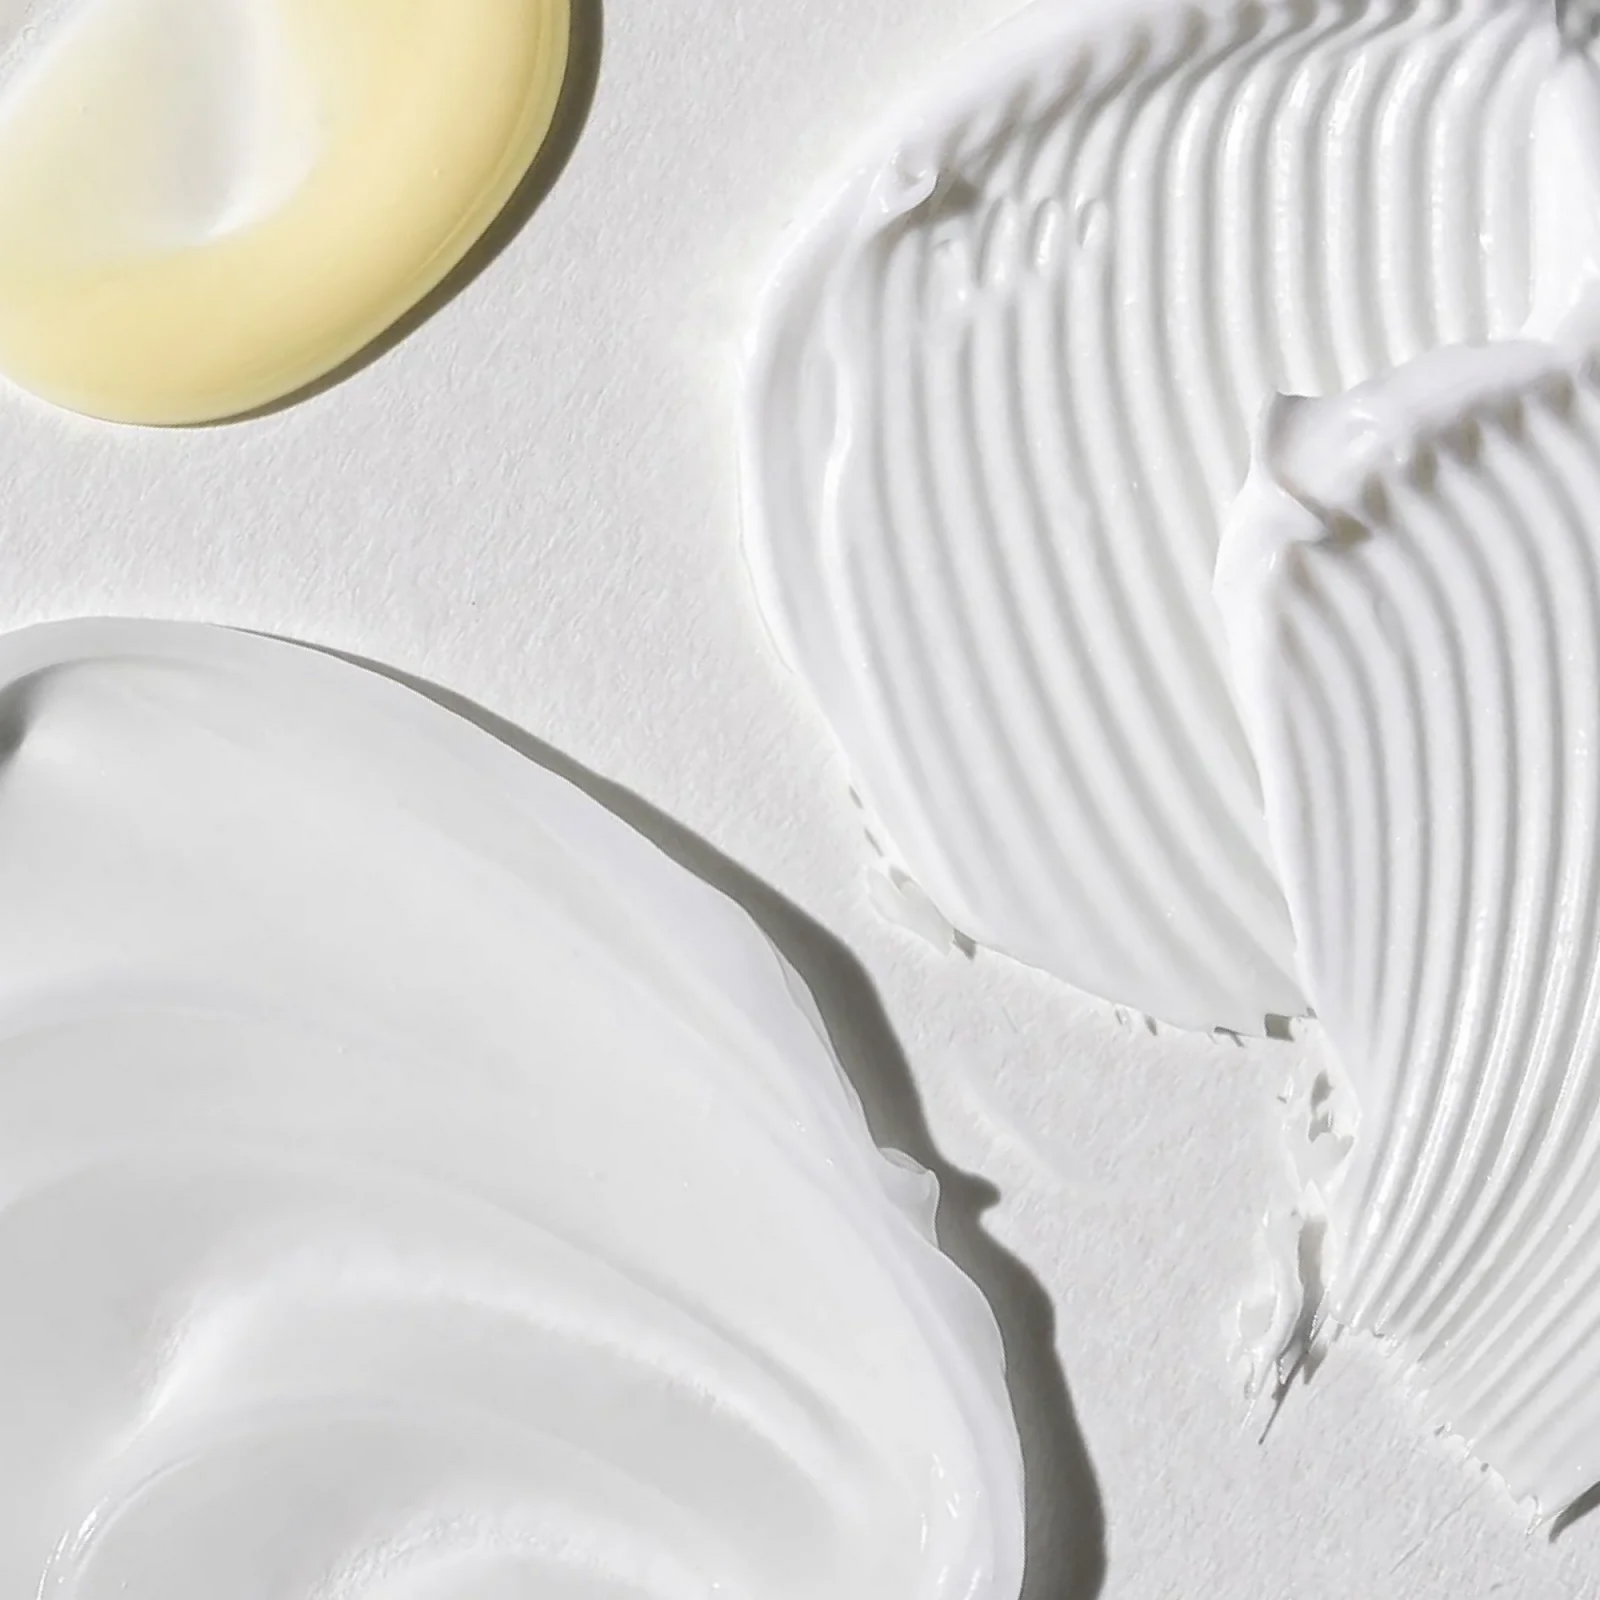 Why Is My Skin So Dry Even When I Moisturize: 6 Reasons